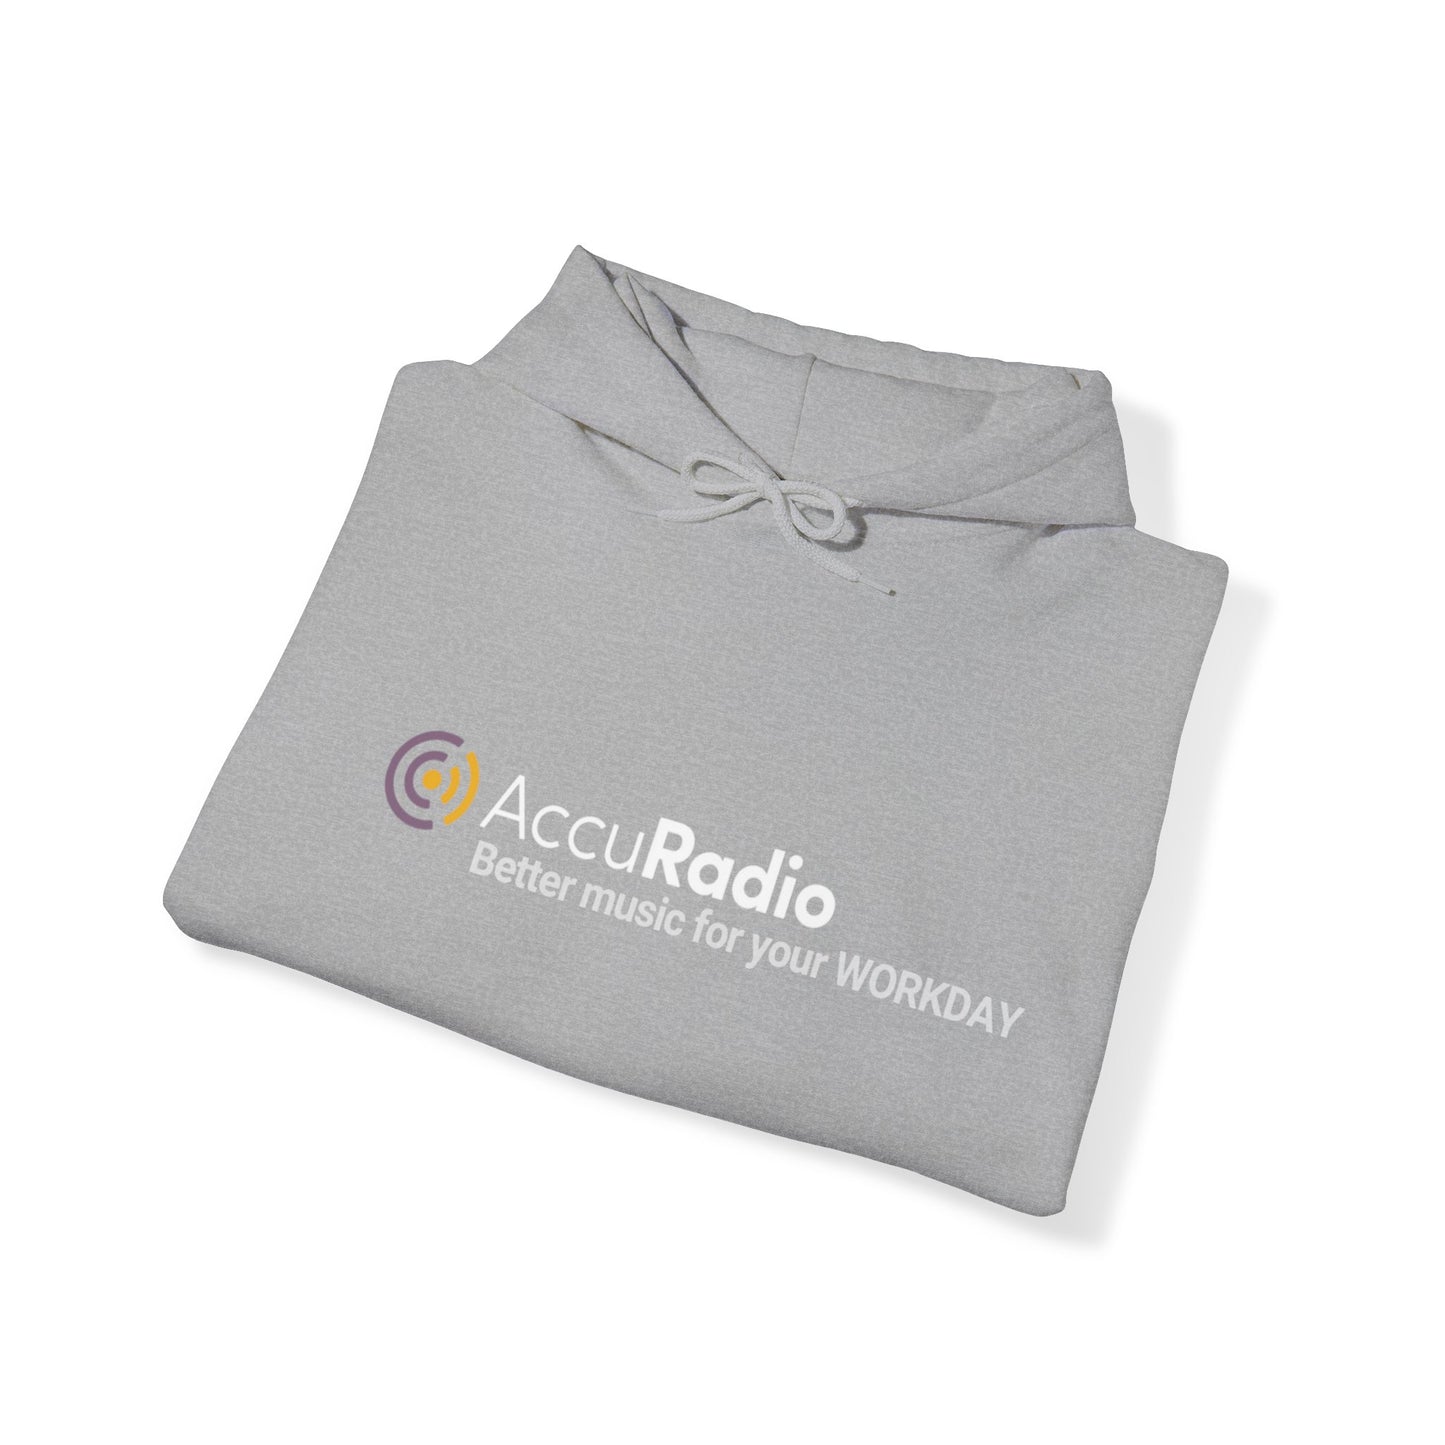 AccuRadio "Better music to your workday" unisex hoody